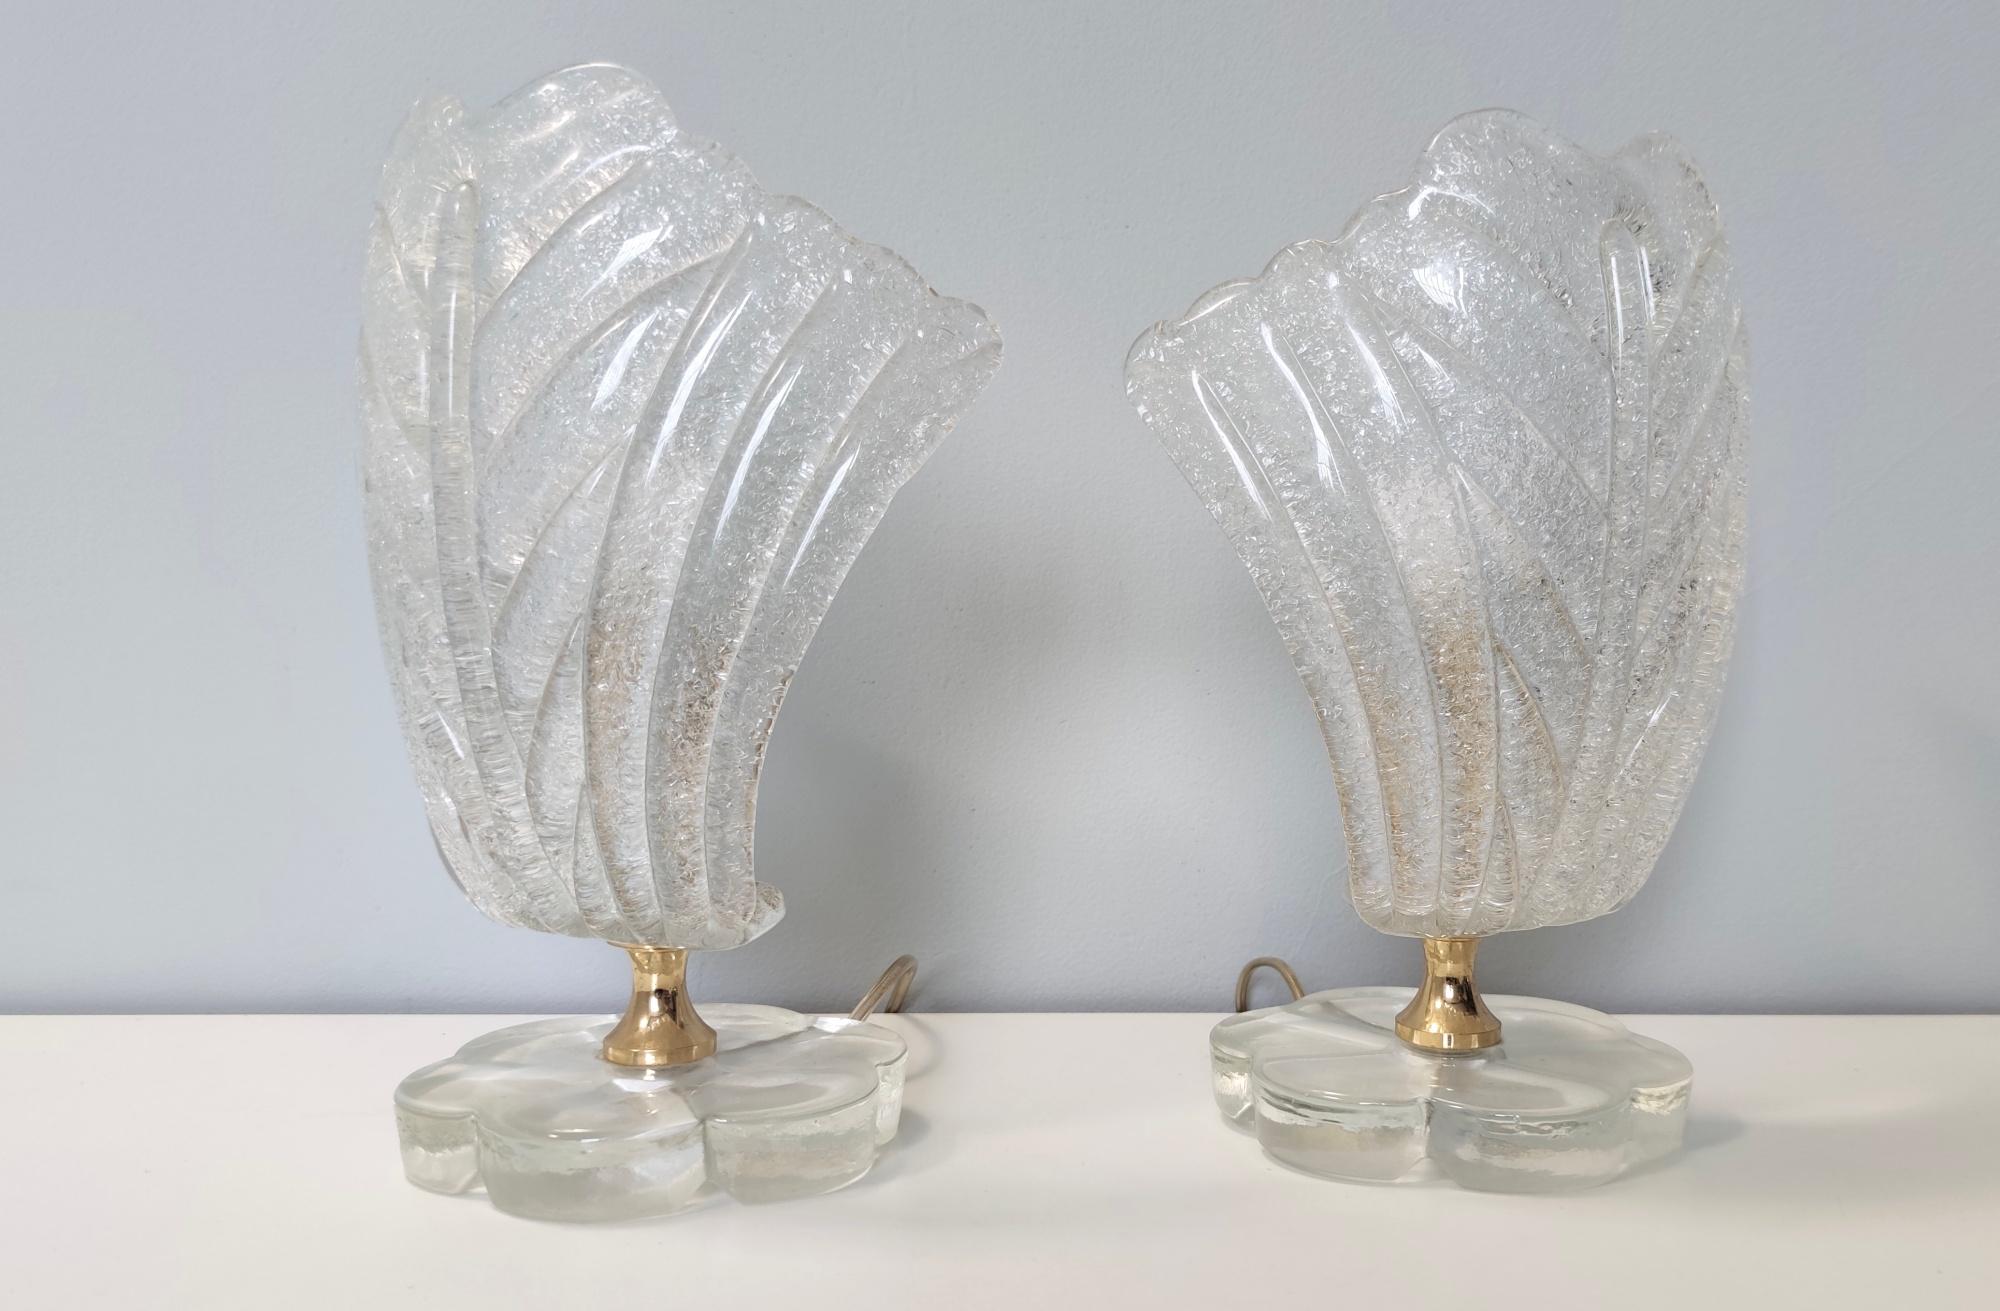 Brass Pair of Vintage Revolving Murano Glass Table Lamps Ascribable to Barovier, Italy